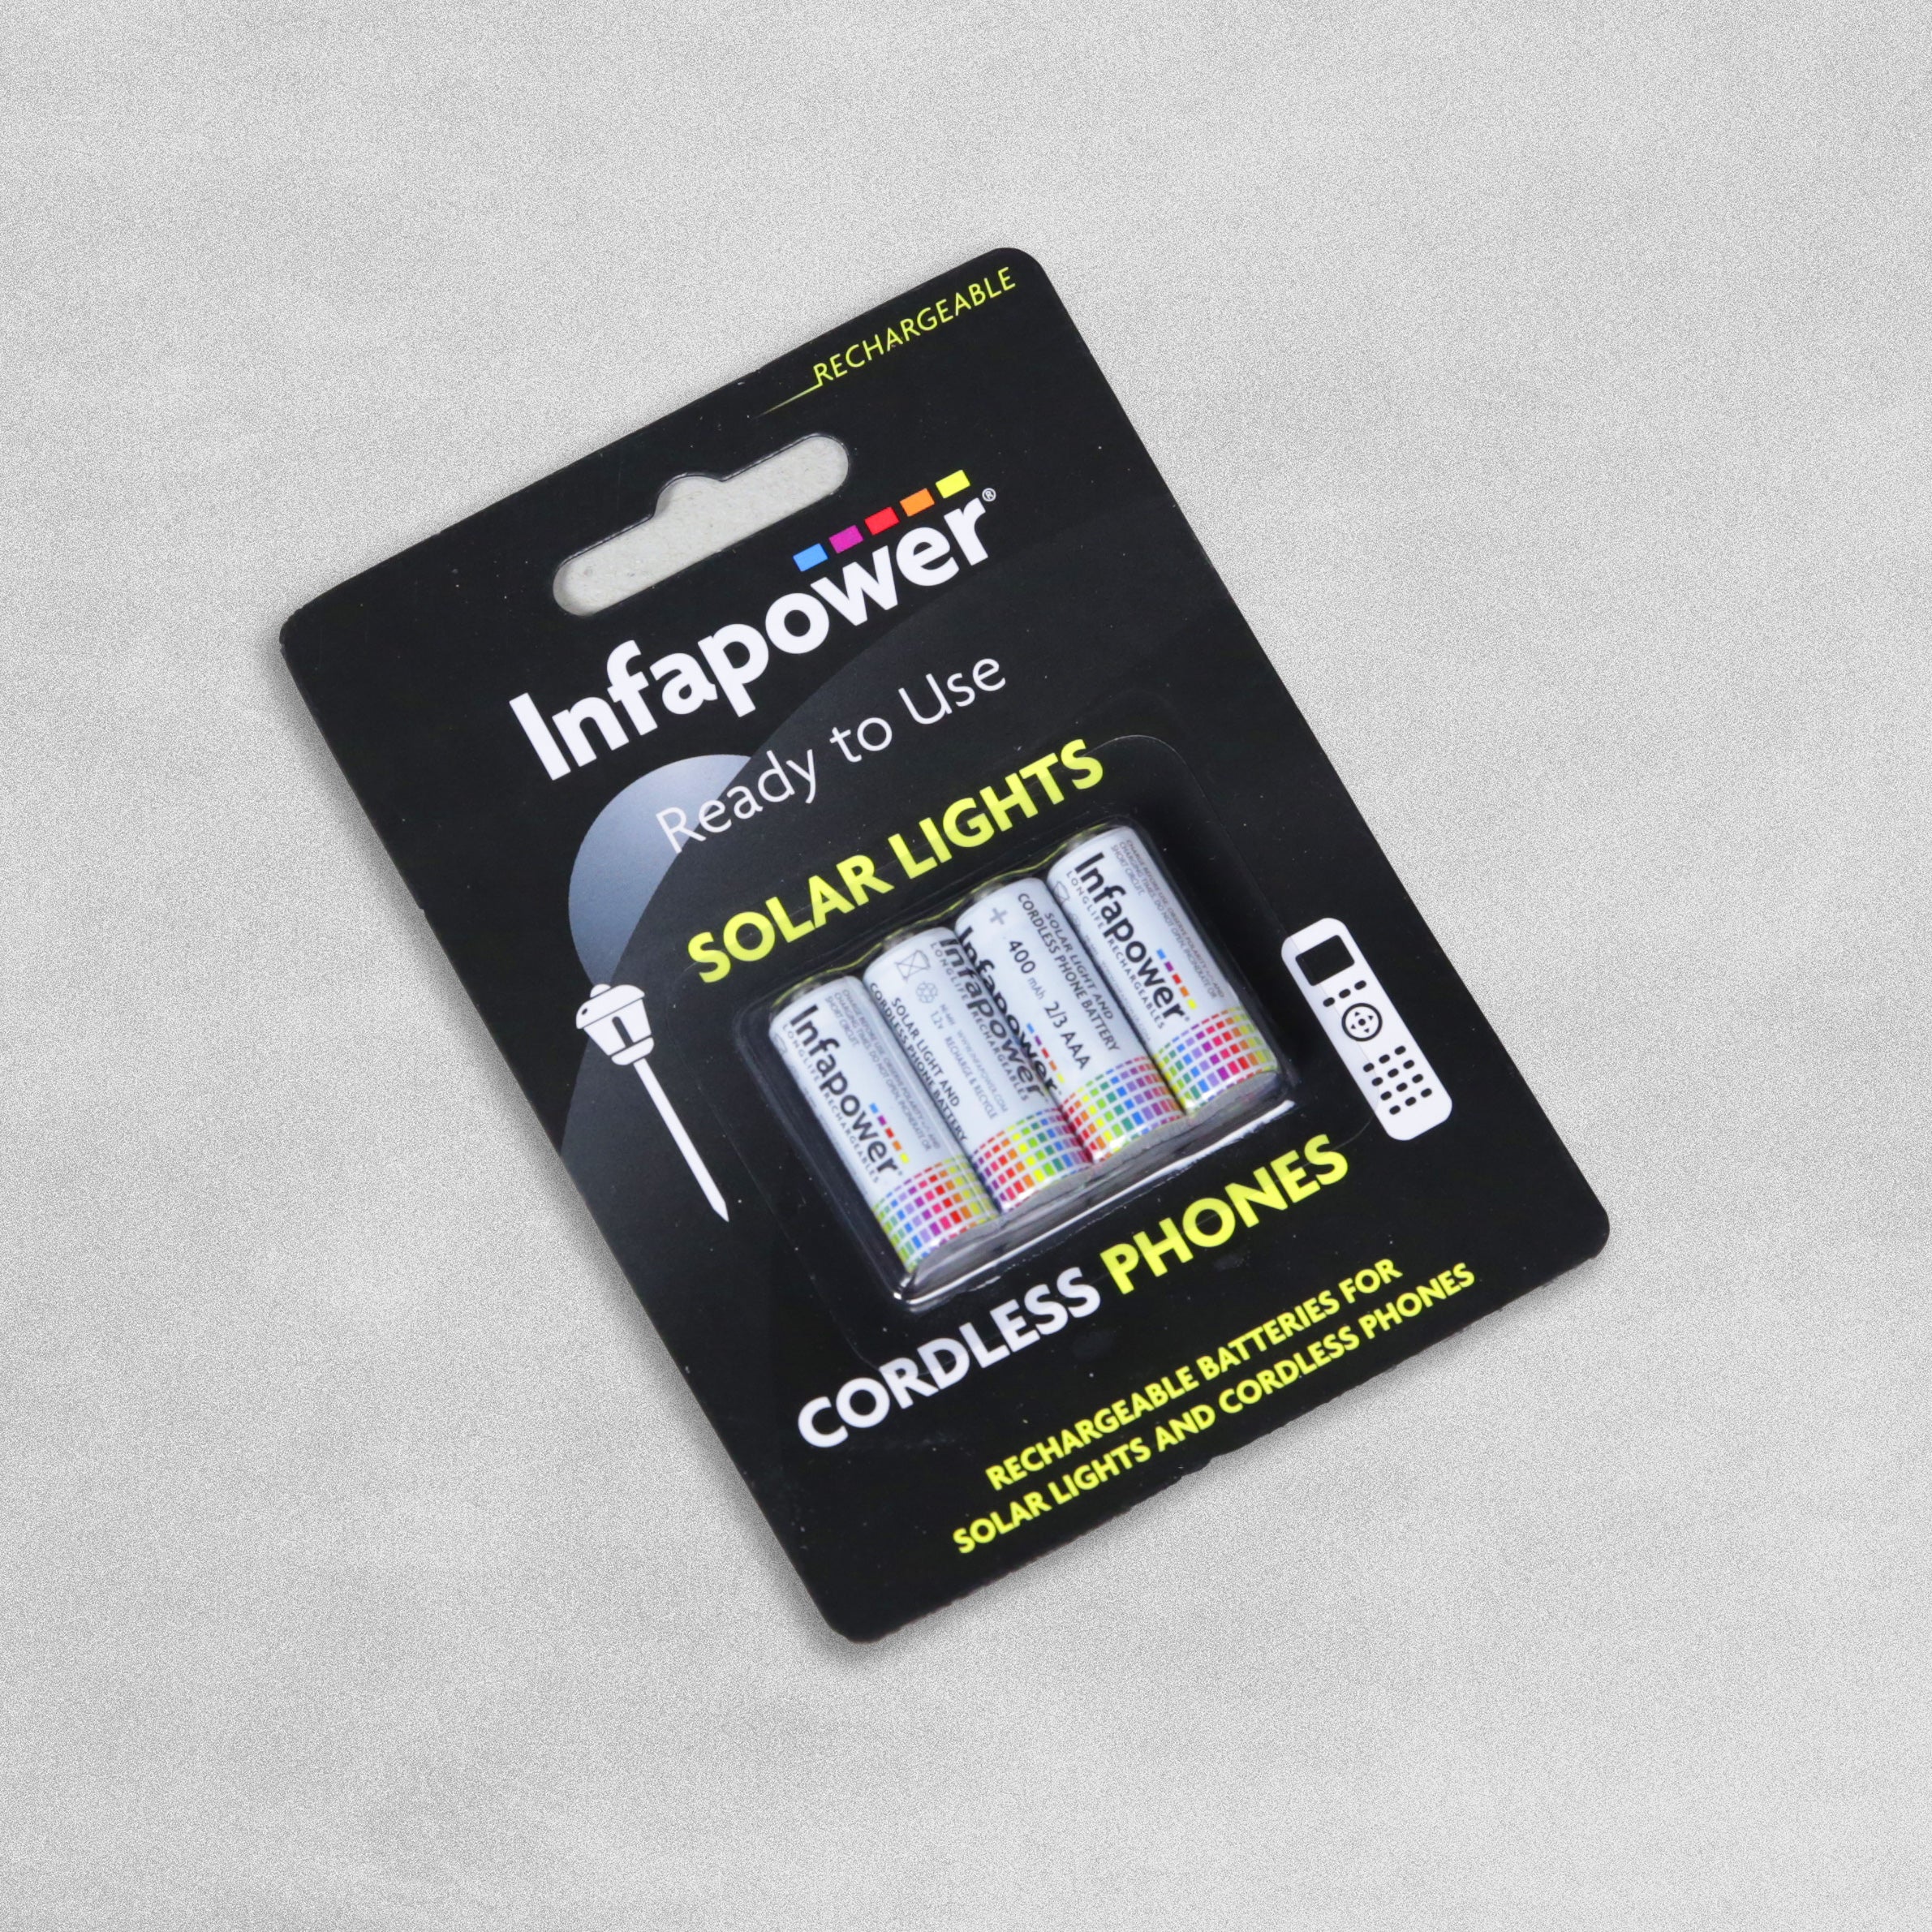 Infapower Rechargeable Solar Light 2/3 AAA Batteries 400MaH  - Pack of 4